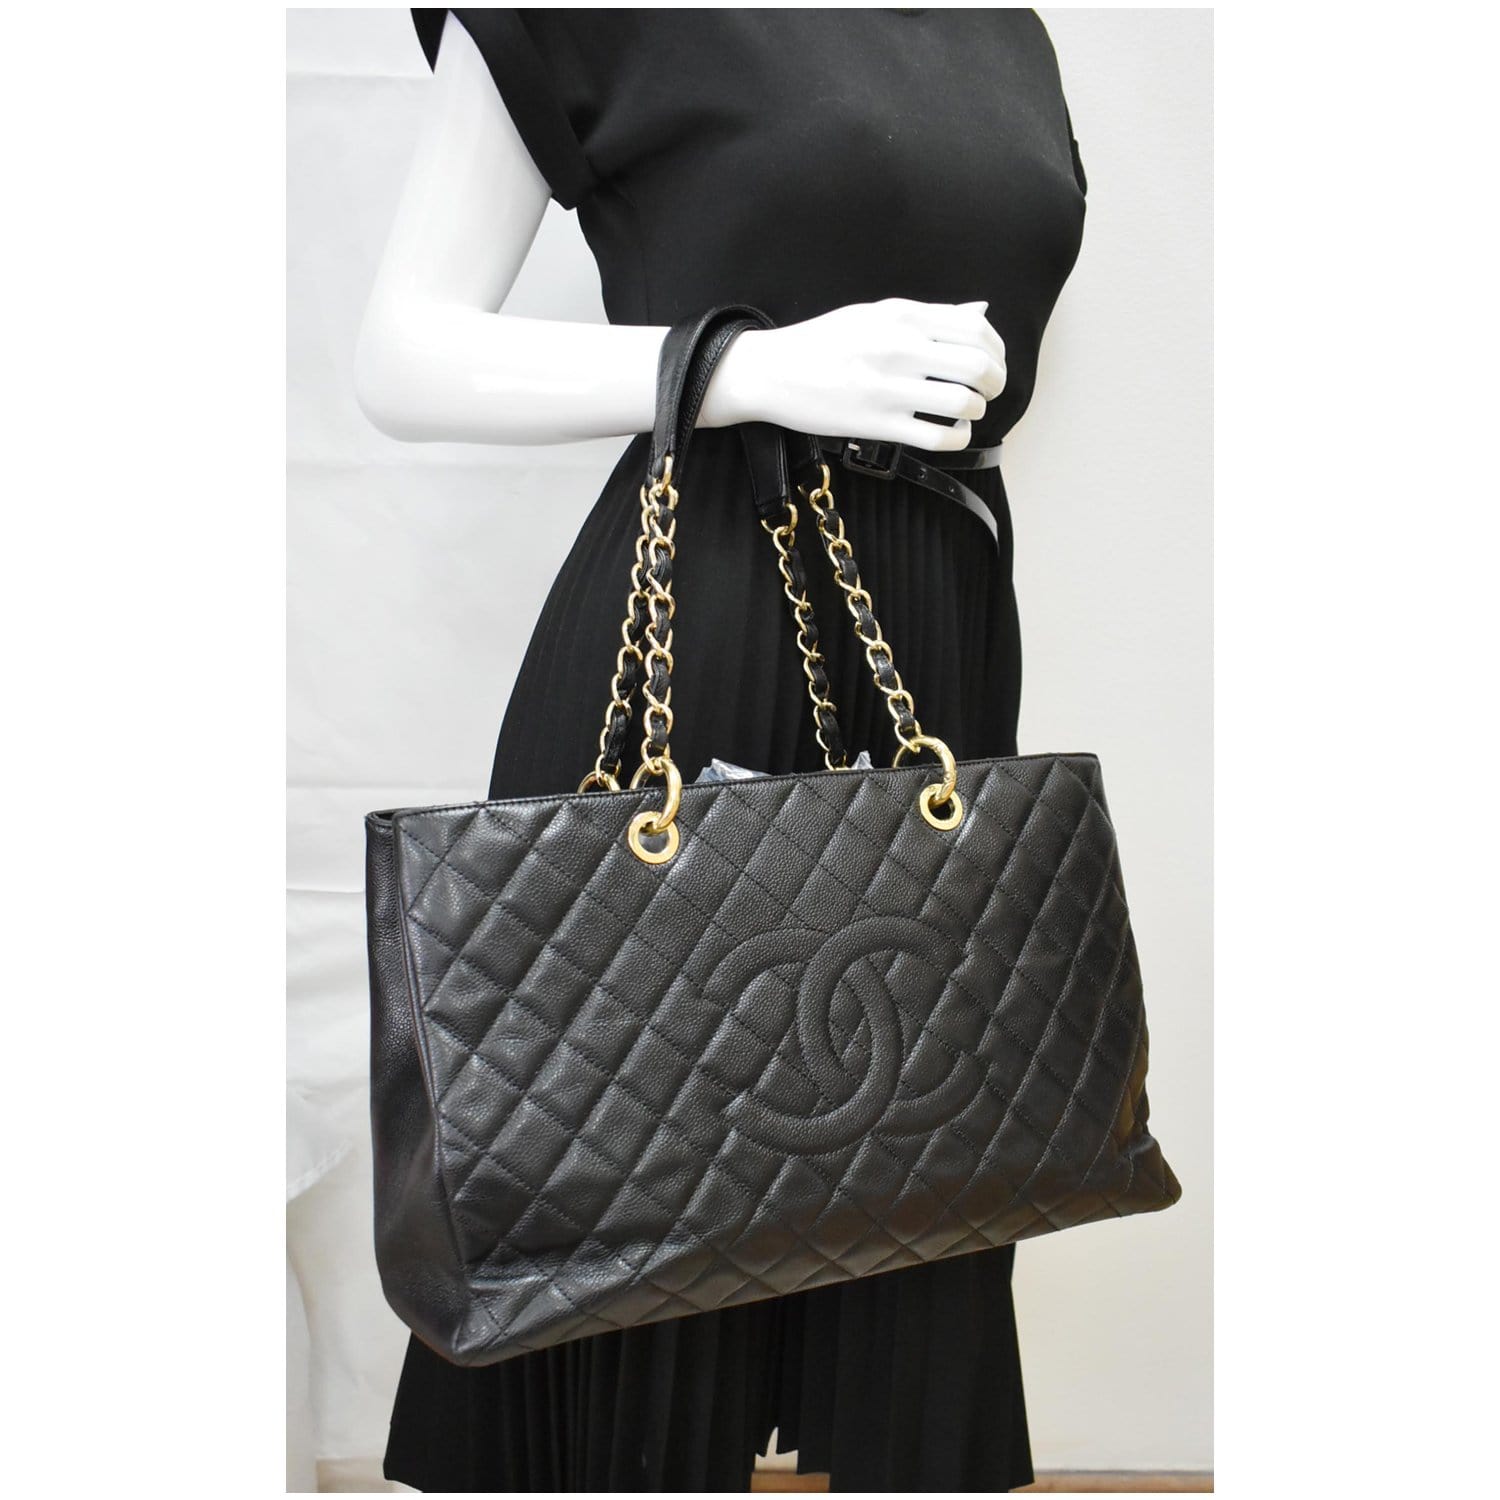 Chanel Grand Shopping Tote: The Big Shopping Tote Sister